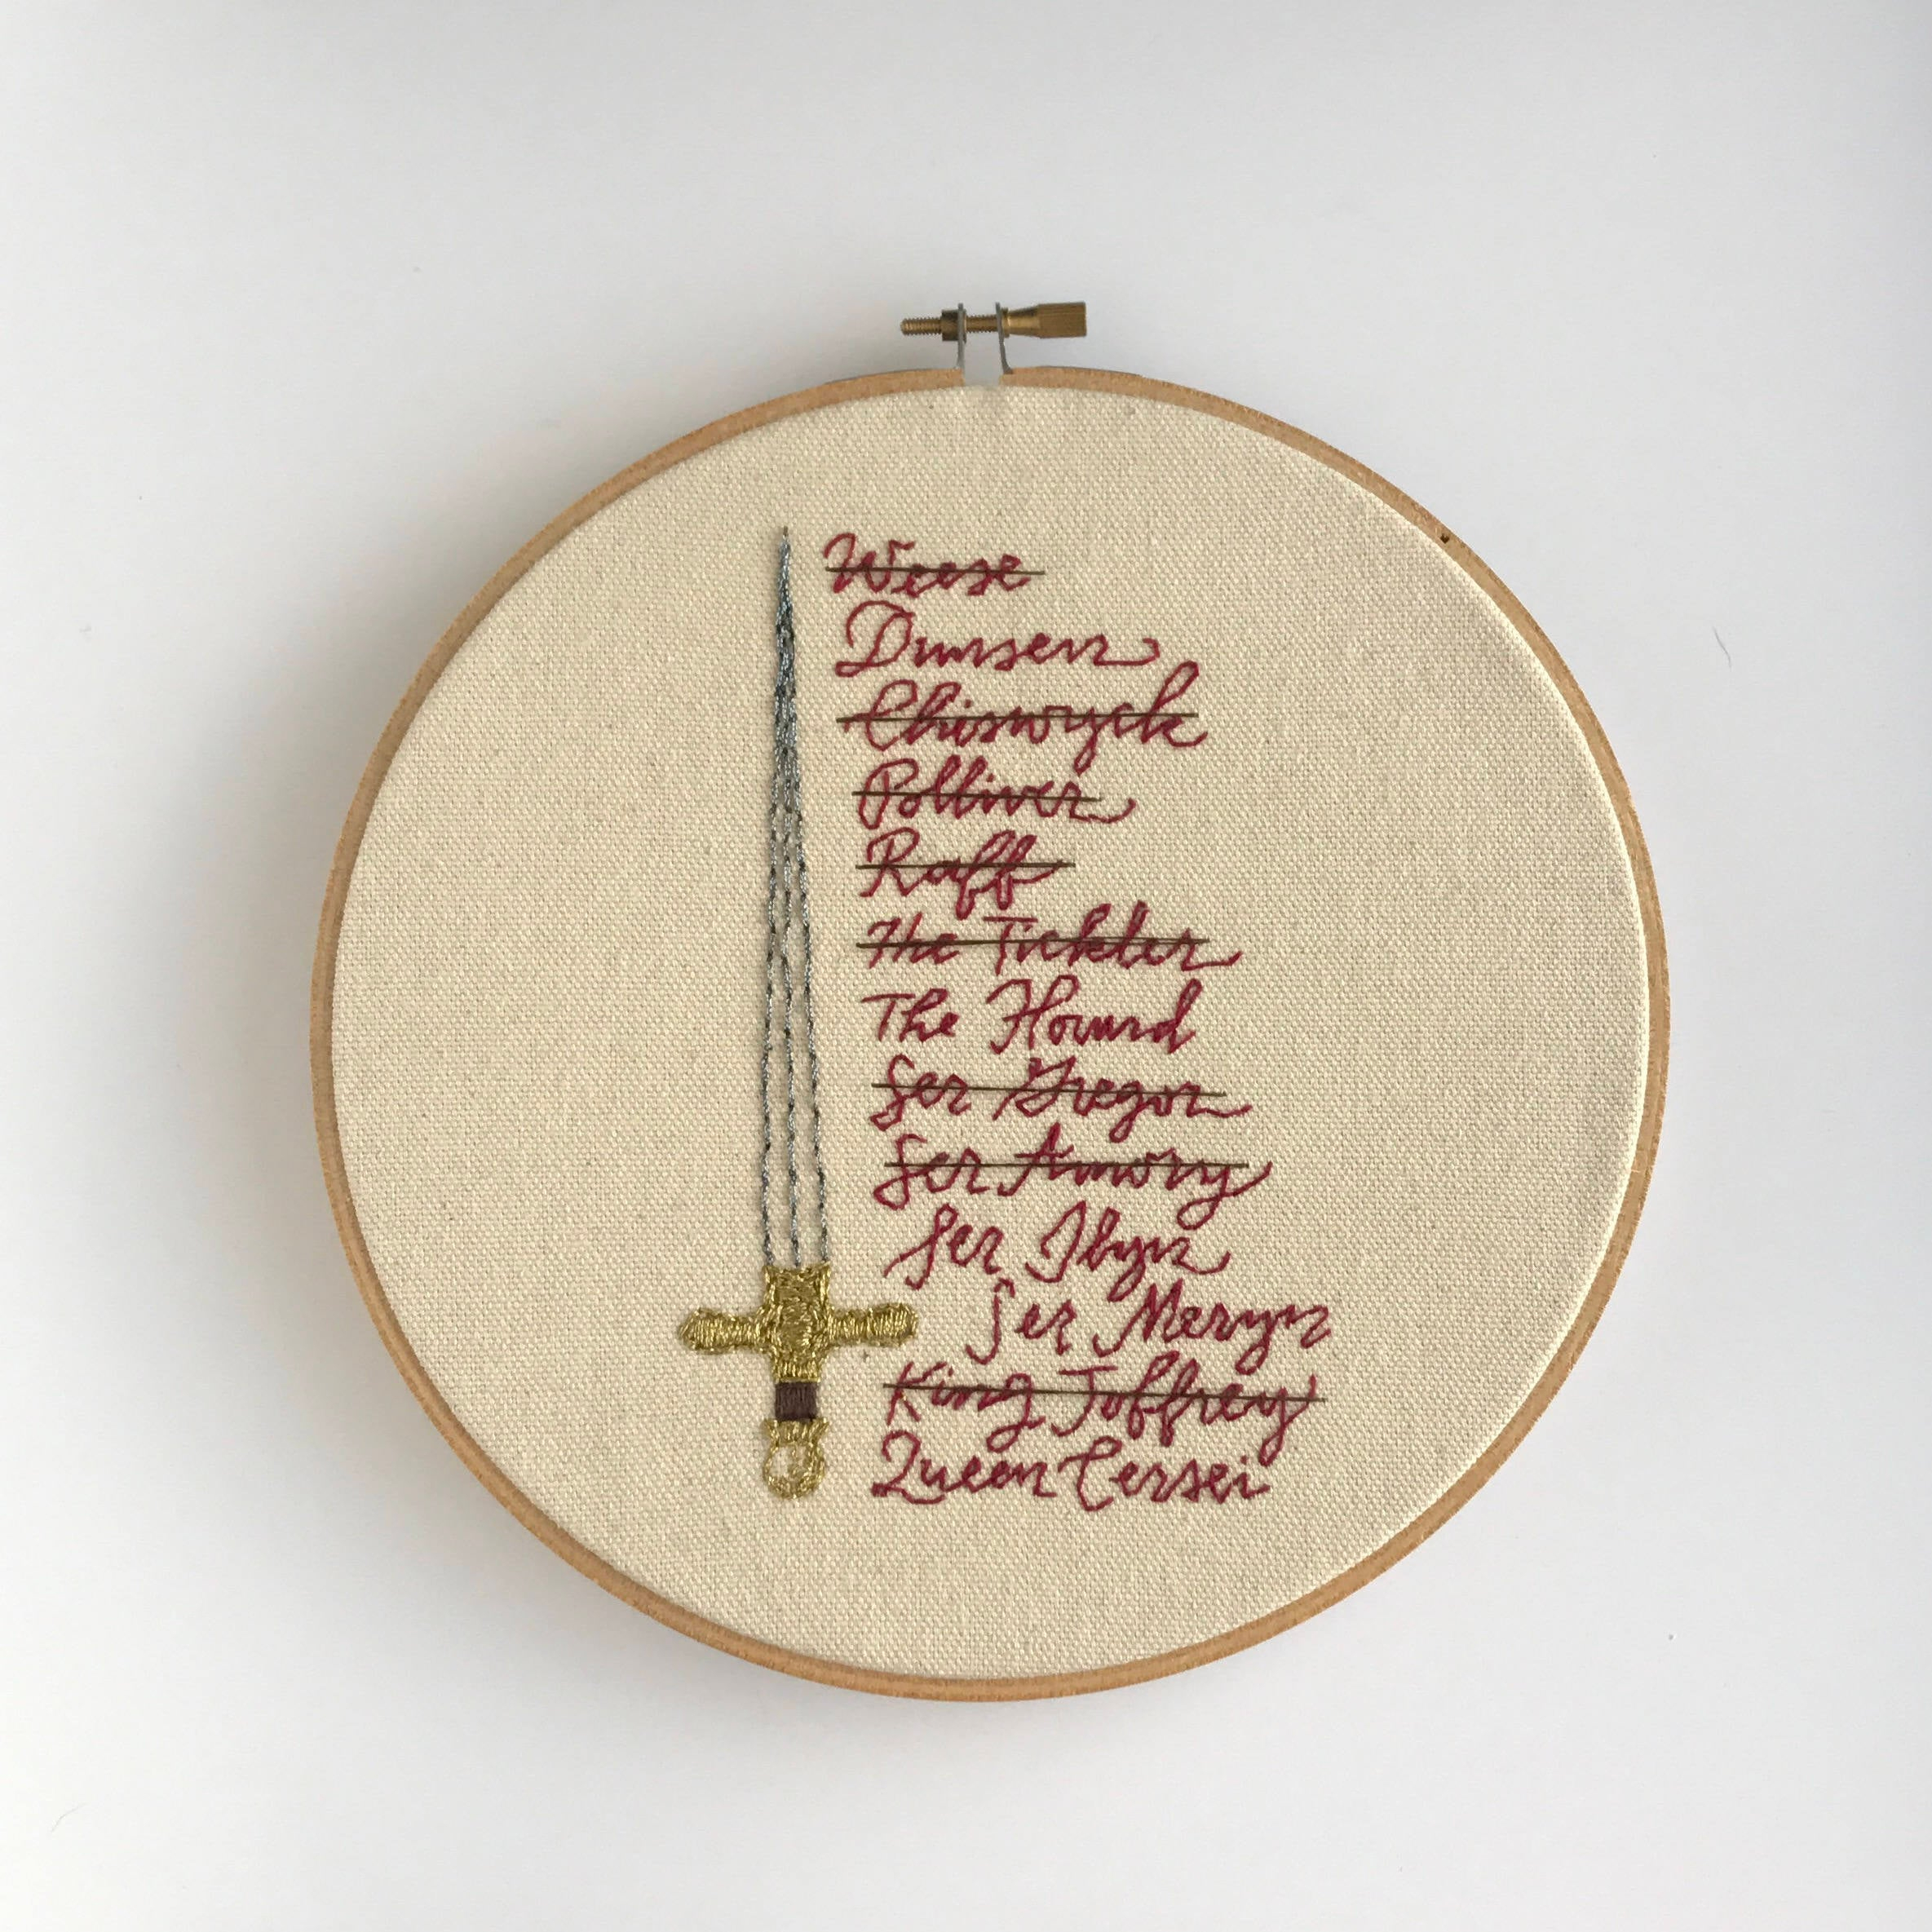 Game Of Thrones Embroidery Patterns Asoiaf Embroidery Pattern Aryas List Game Of Thrones Arya